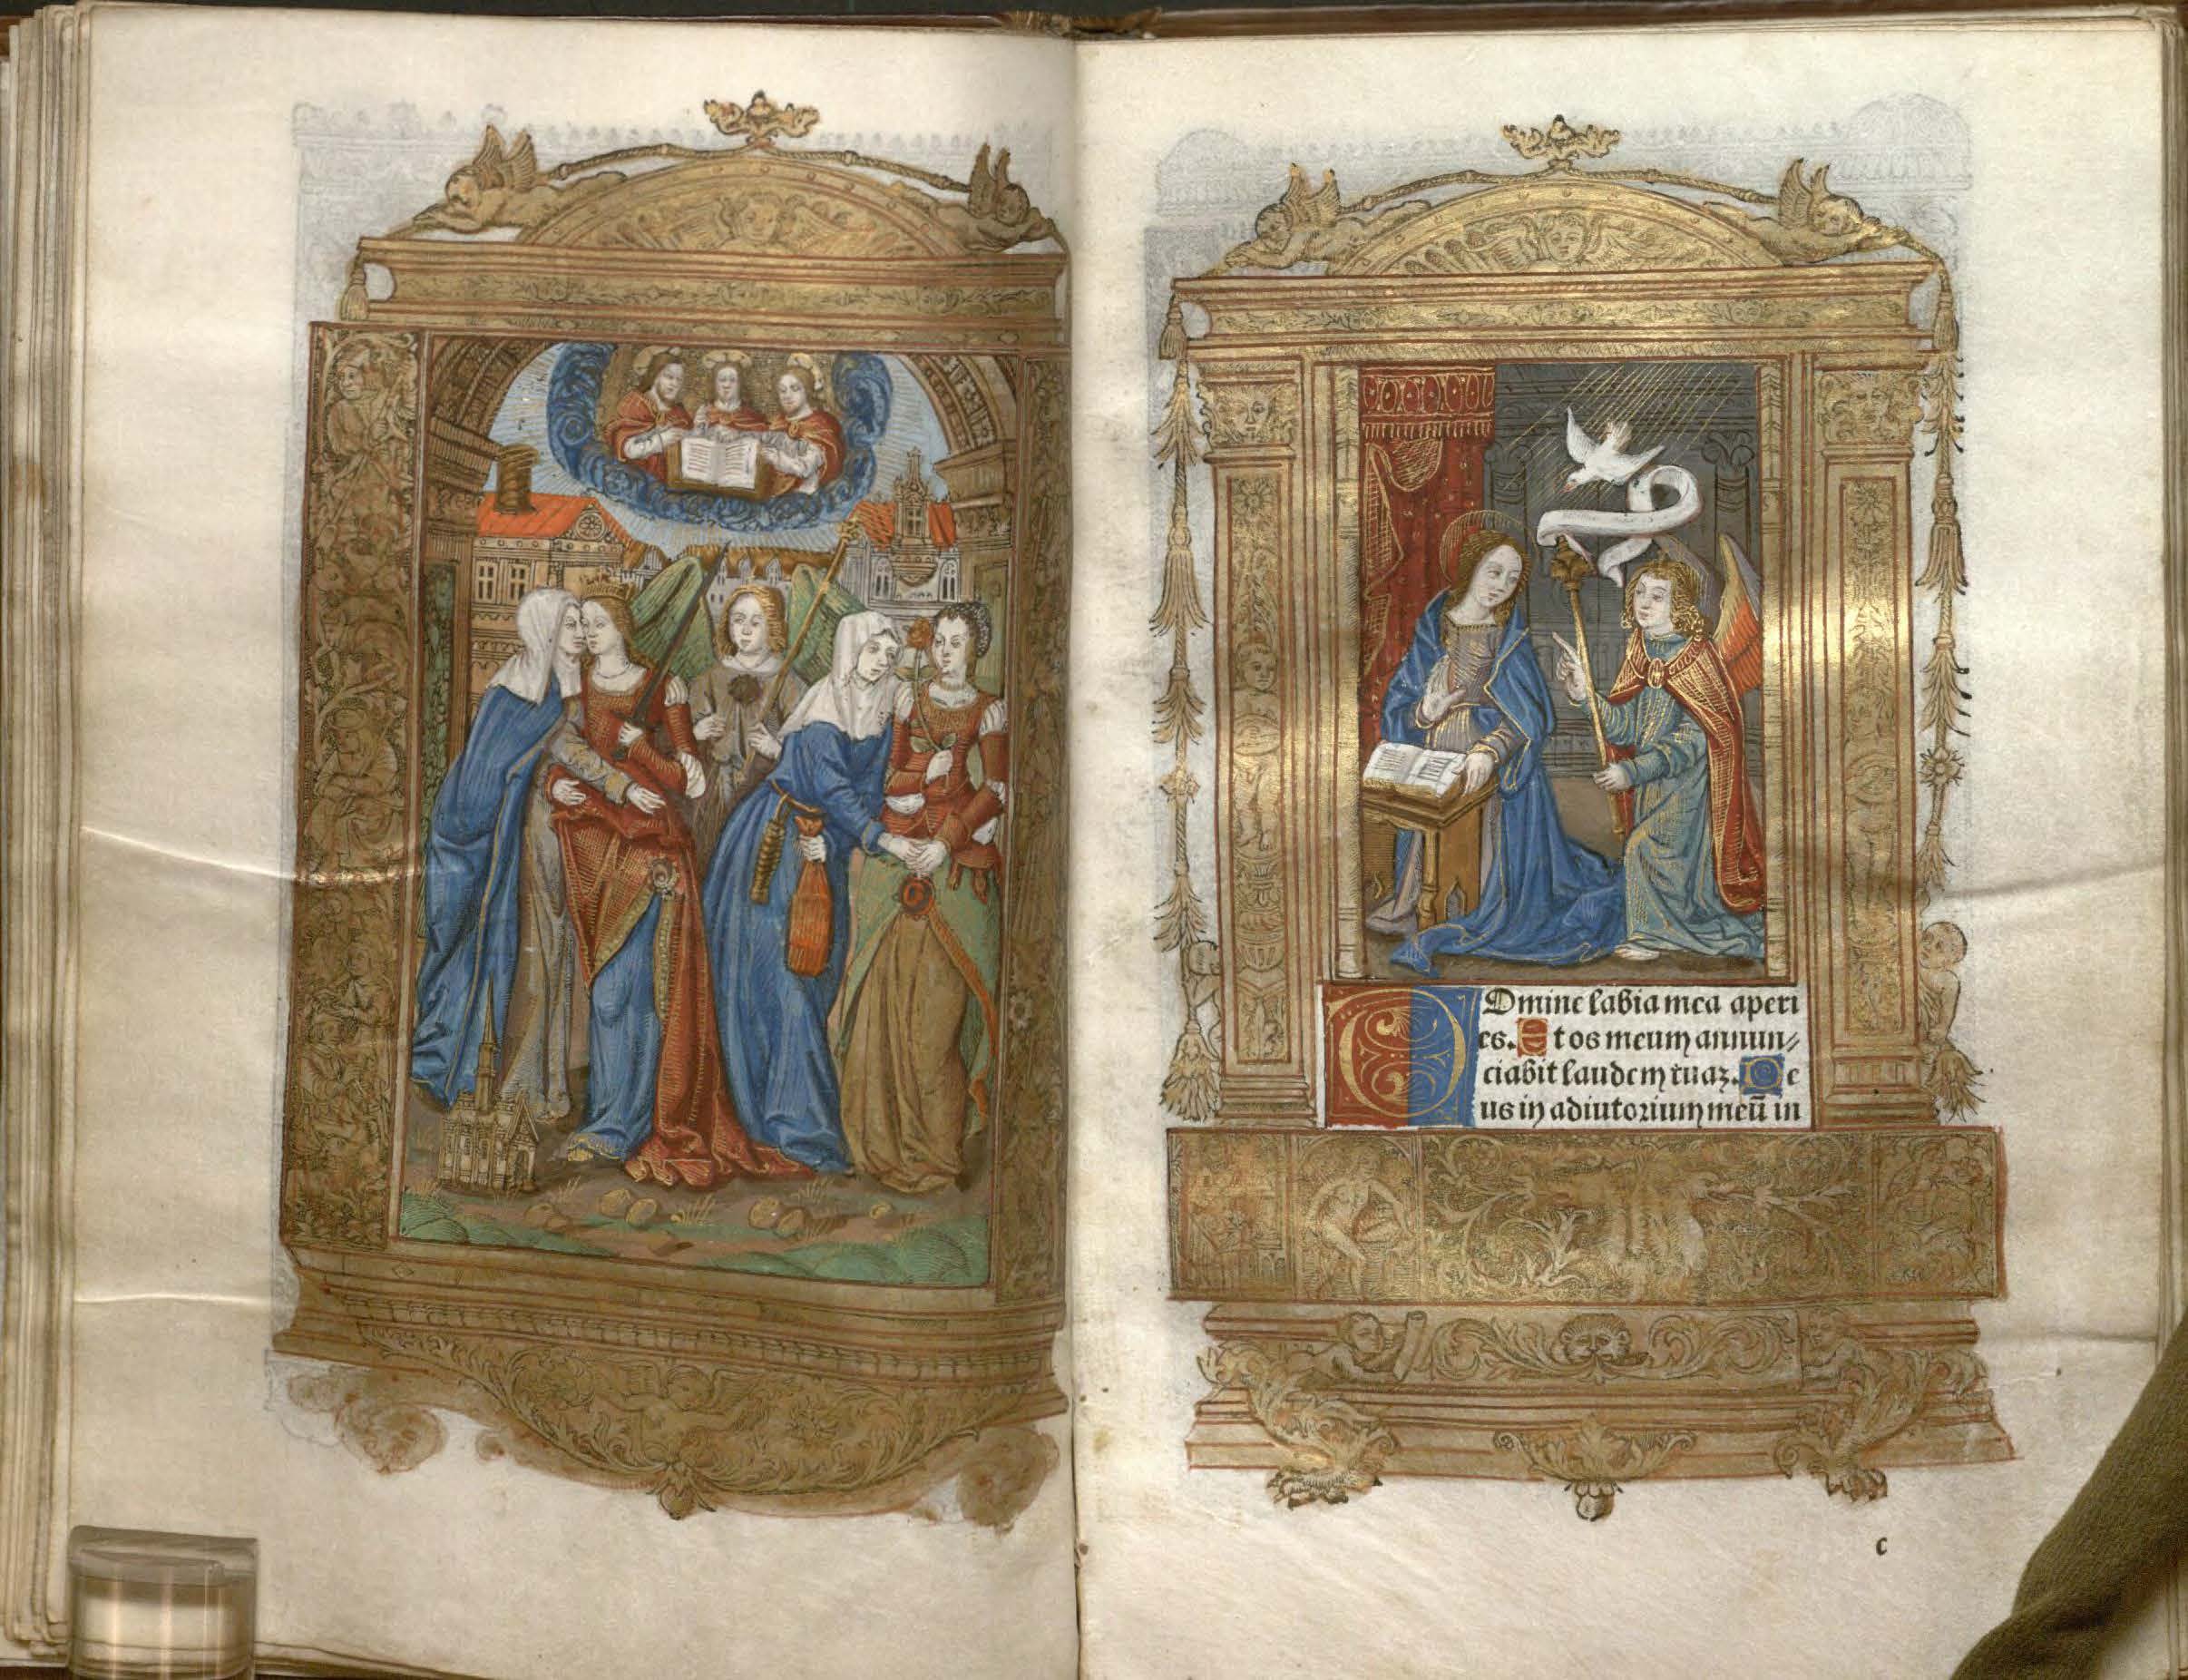 Image of a printed books of hours at an opening with two miniatures.